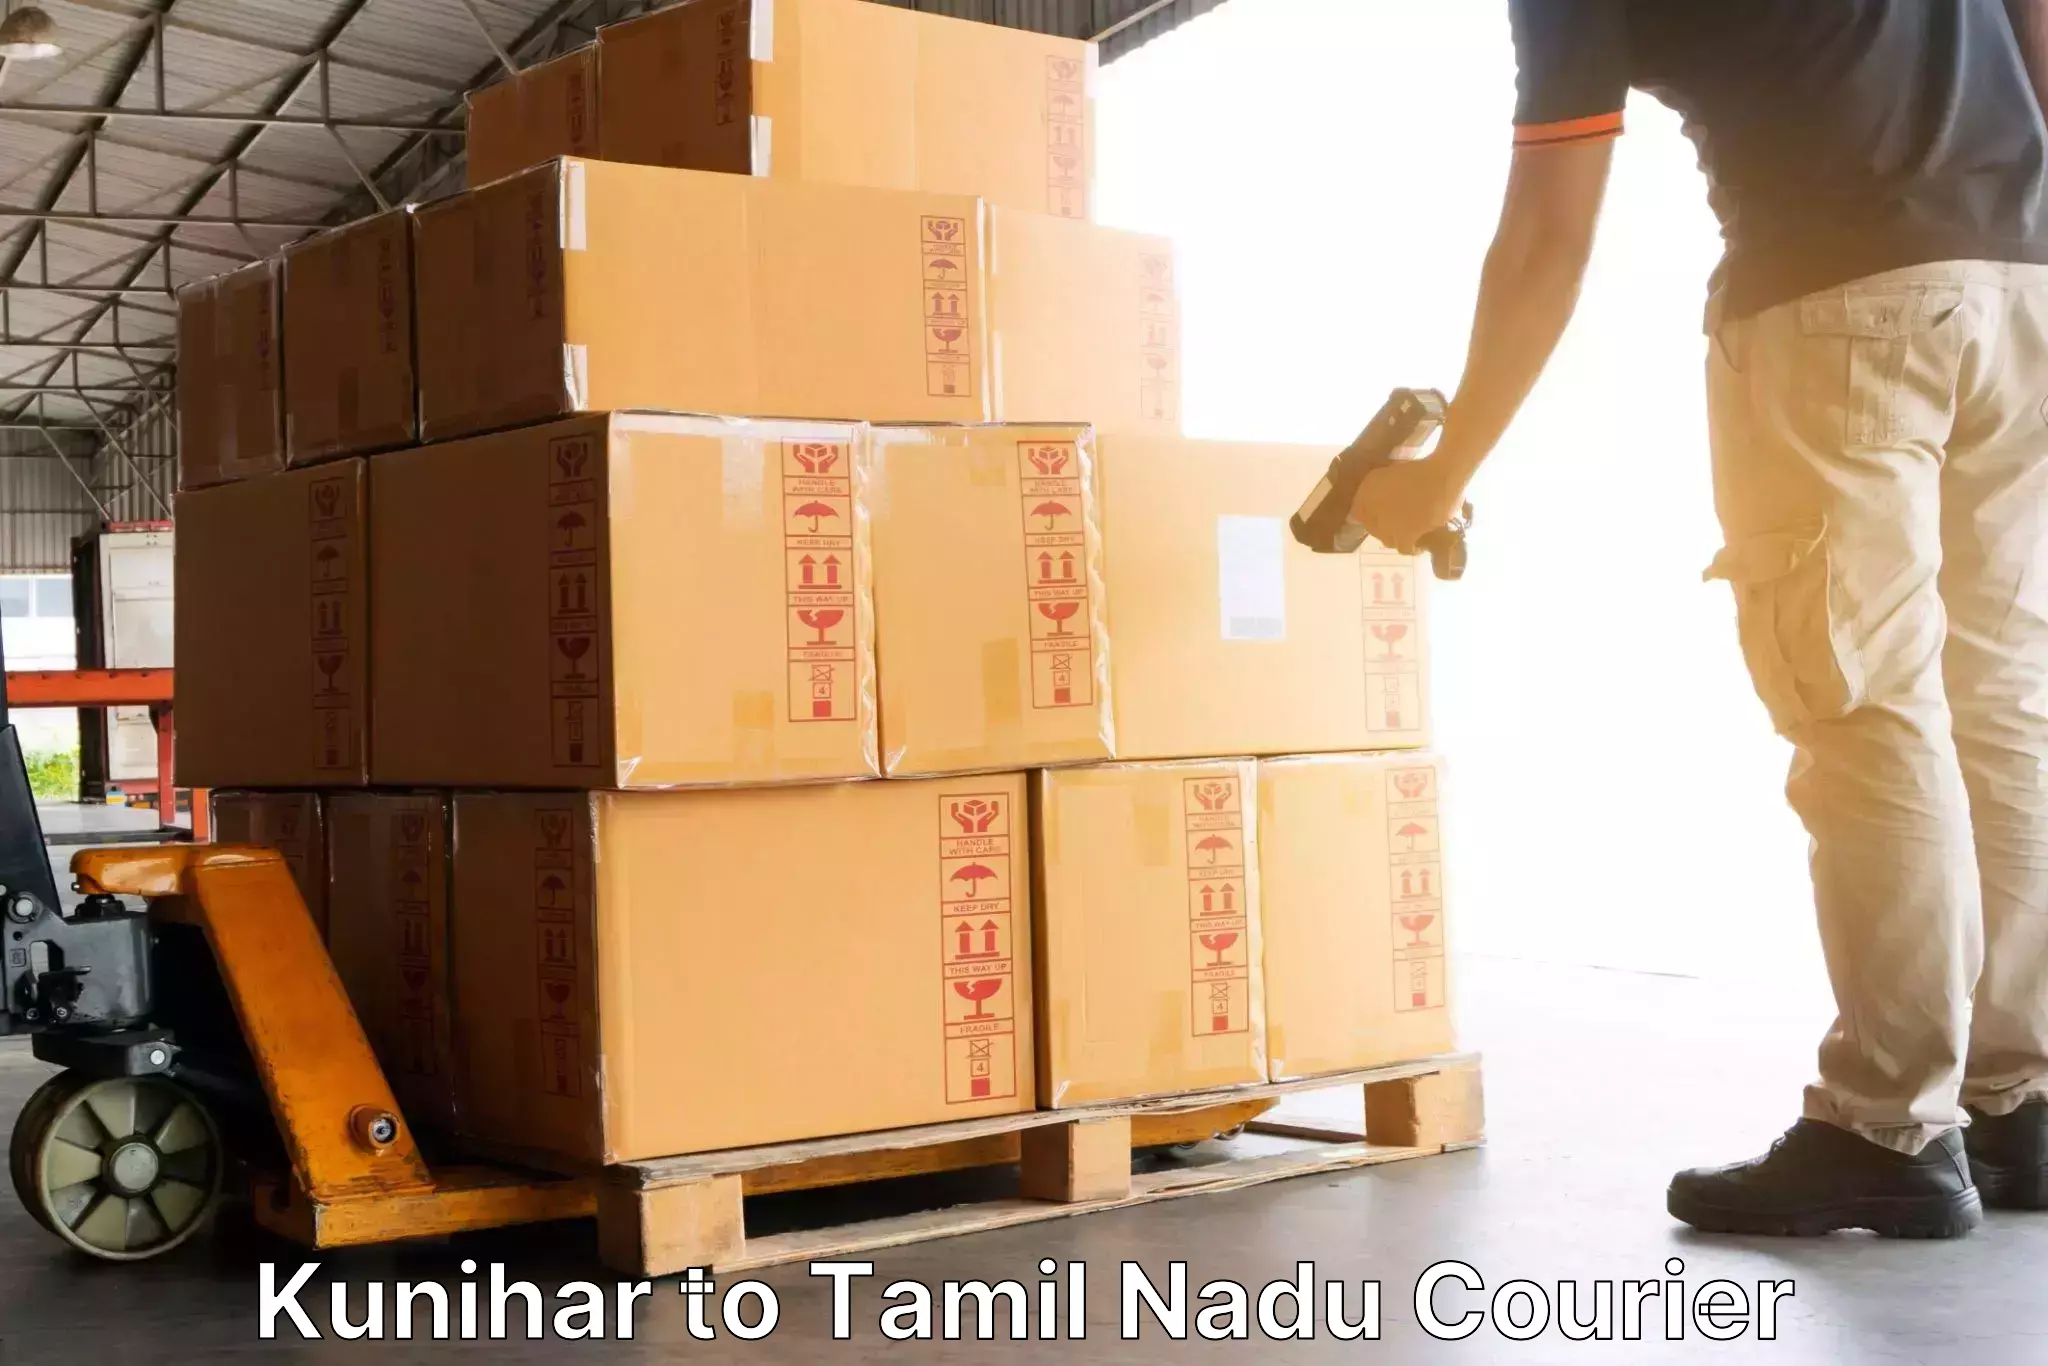 Supply chain delivery Kunihar to Ennore Port Chennai